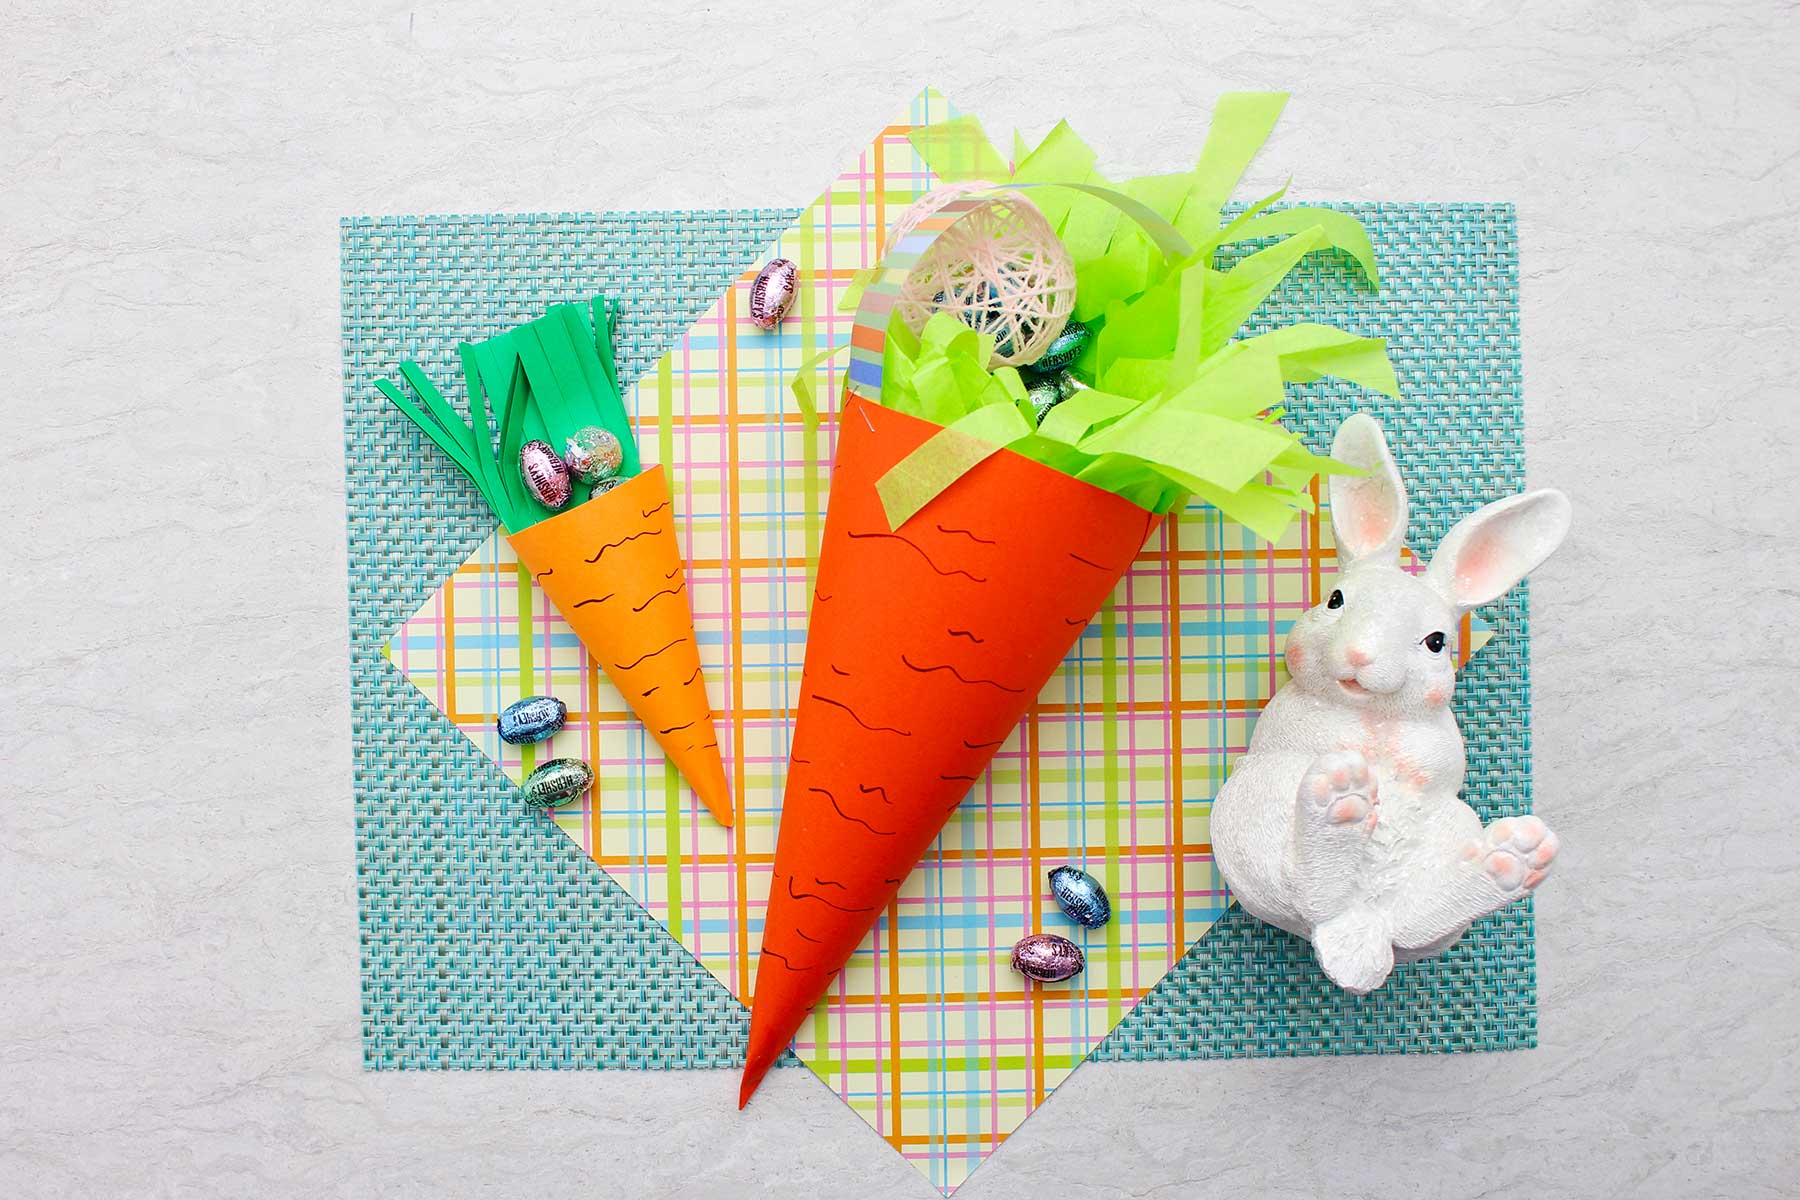 Completed carrot Easter baskets, one large and one smaller filled with paper grass and easter egg candy on a plaid piece of paper and robins egg blue placemat.